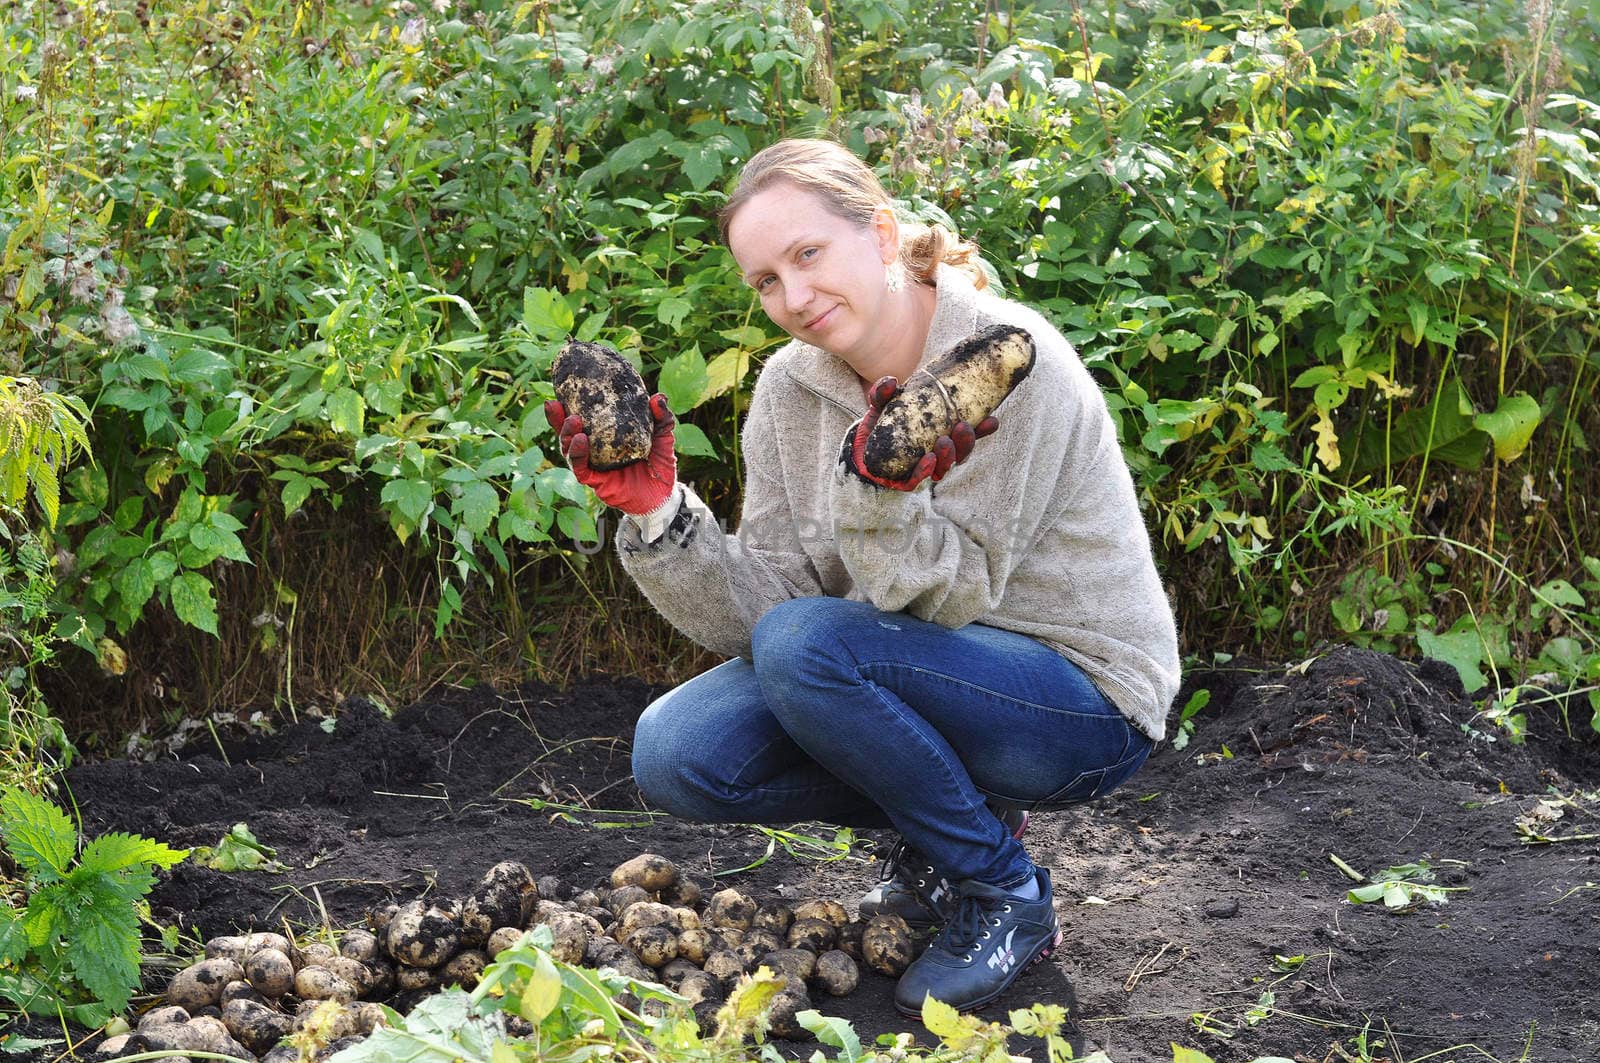 the woman holds large tubers of potatoes which are dug out in a kitchen garden.